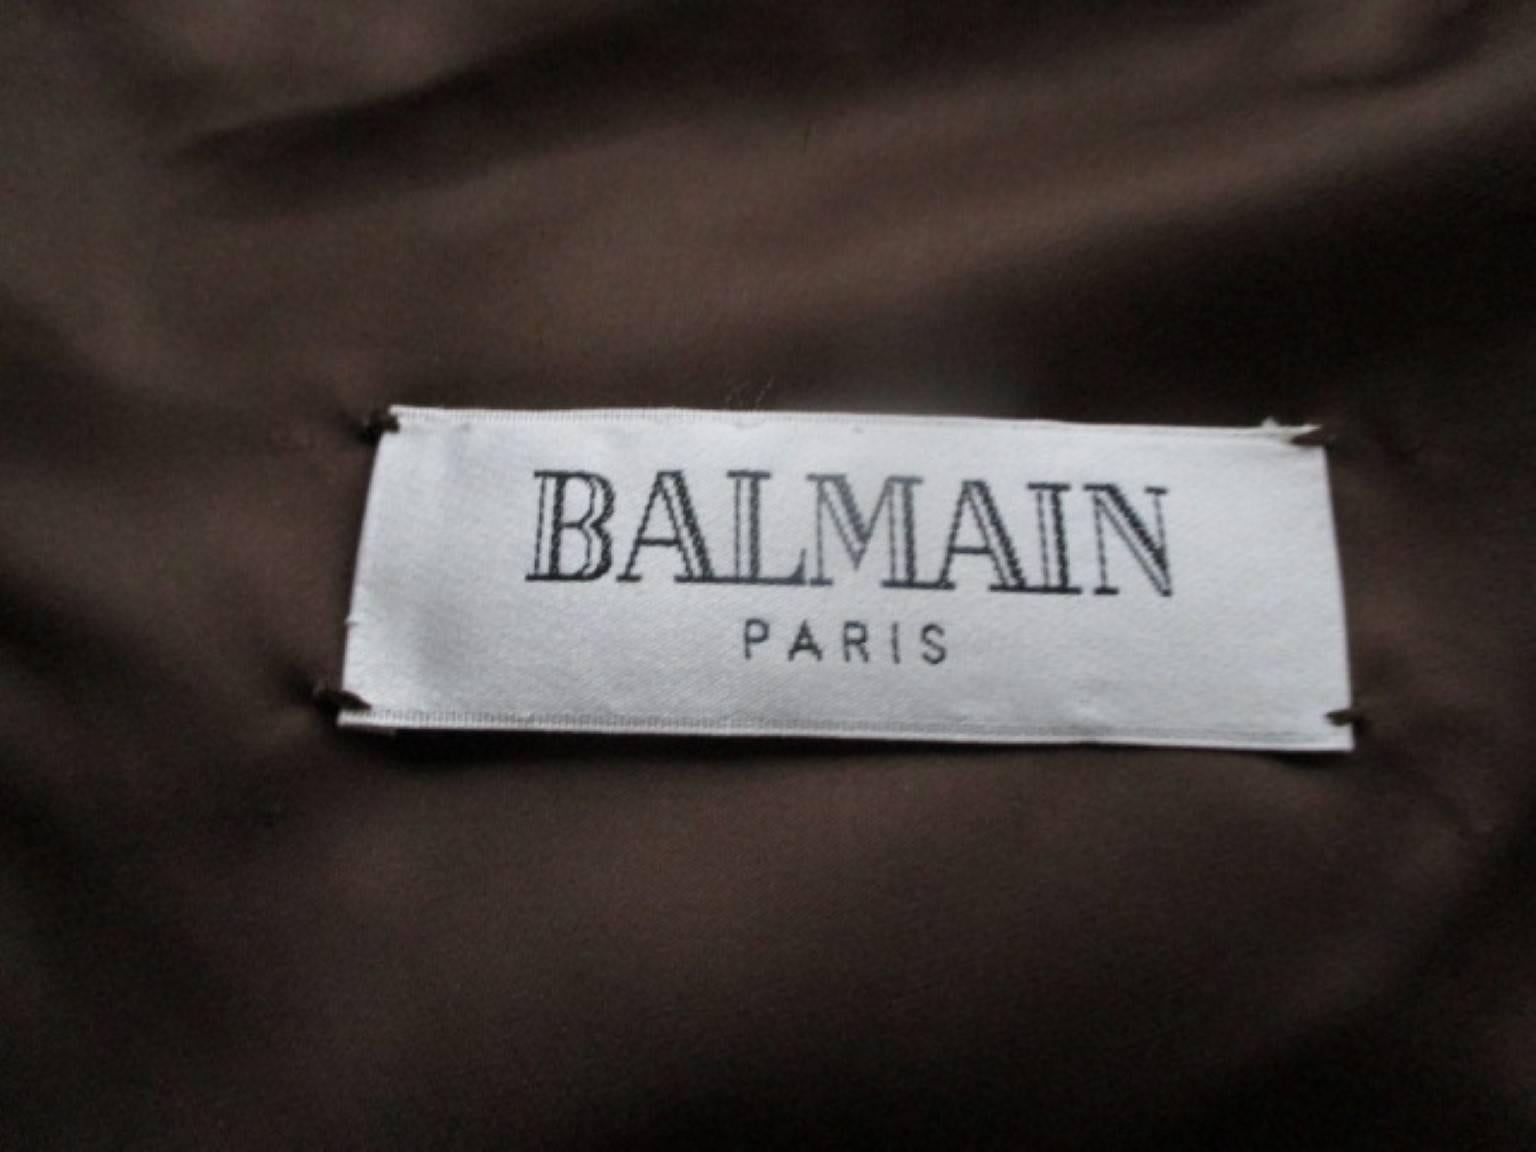 This mink coat is made by Balmain for Guy Laroche.
It has 2 pockets , 3 buttons 
size fits like eu 42